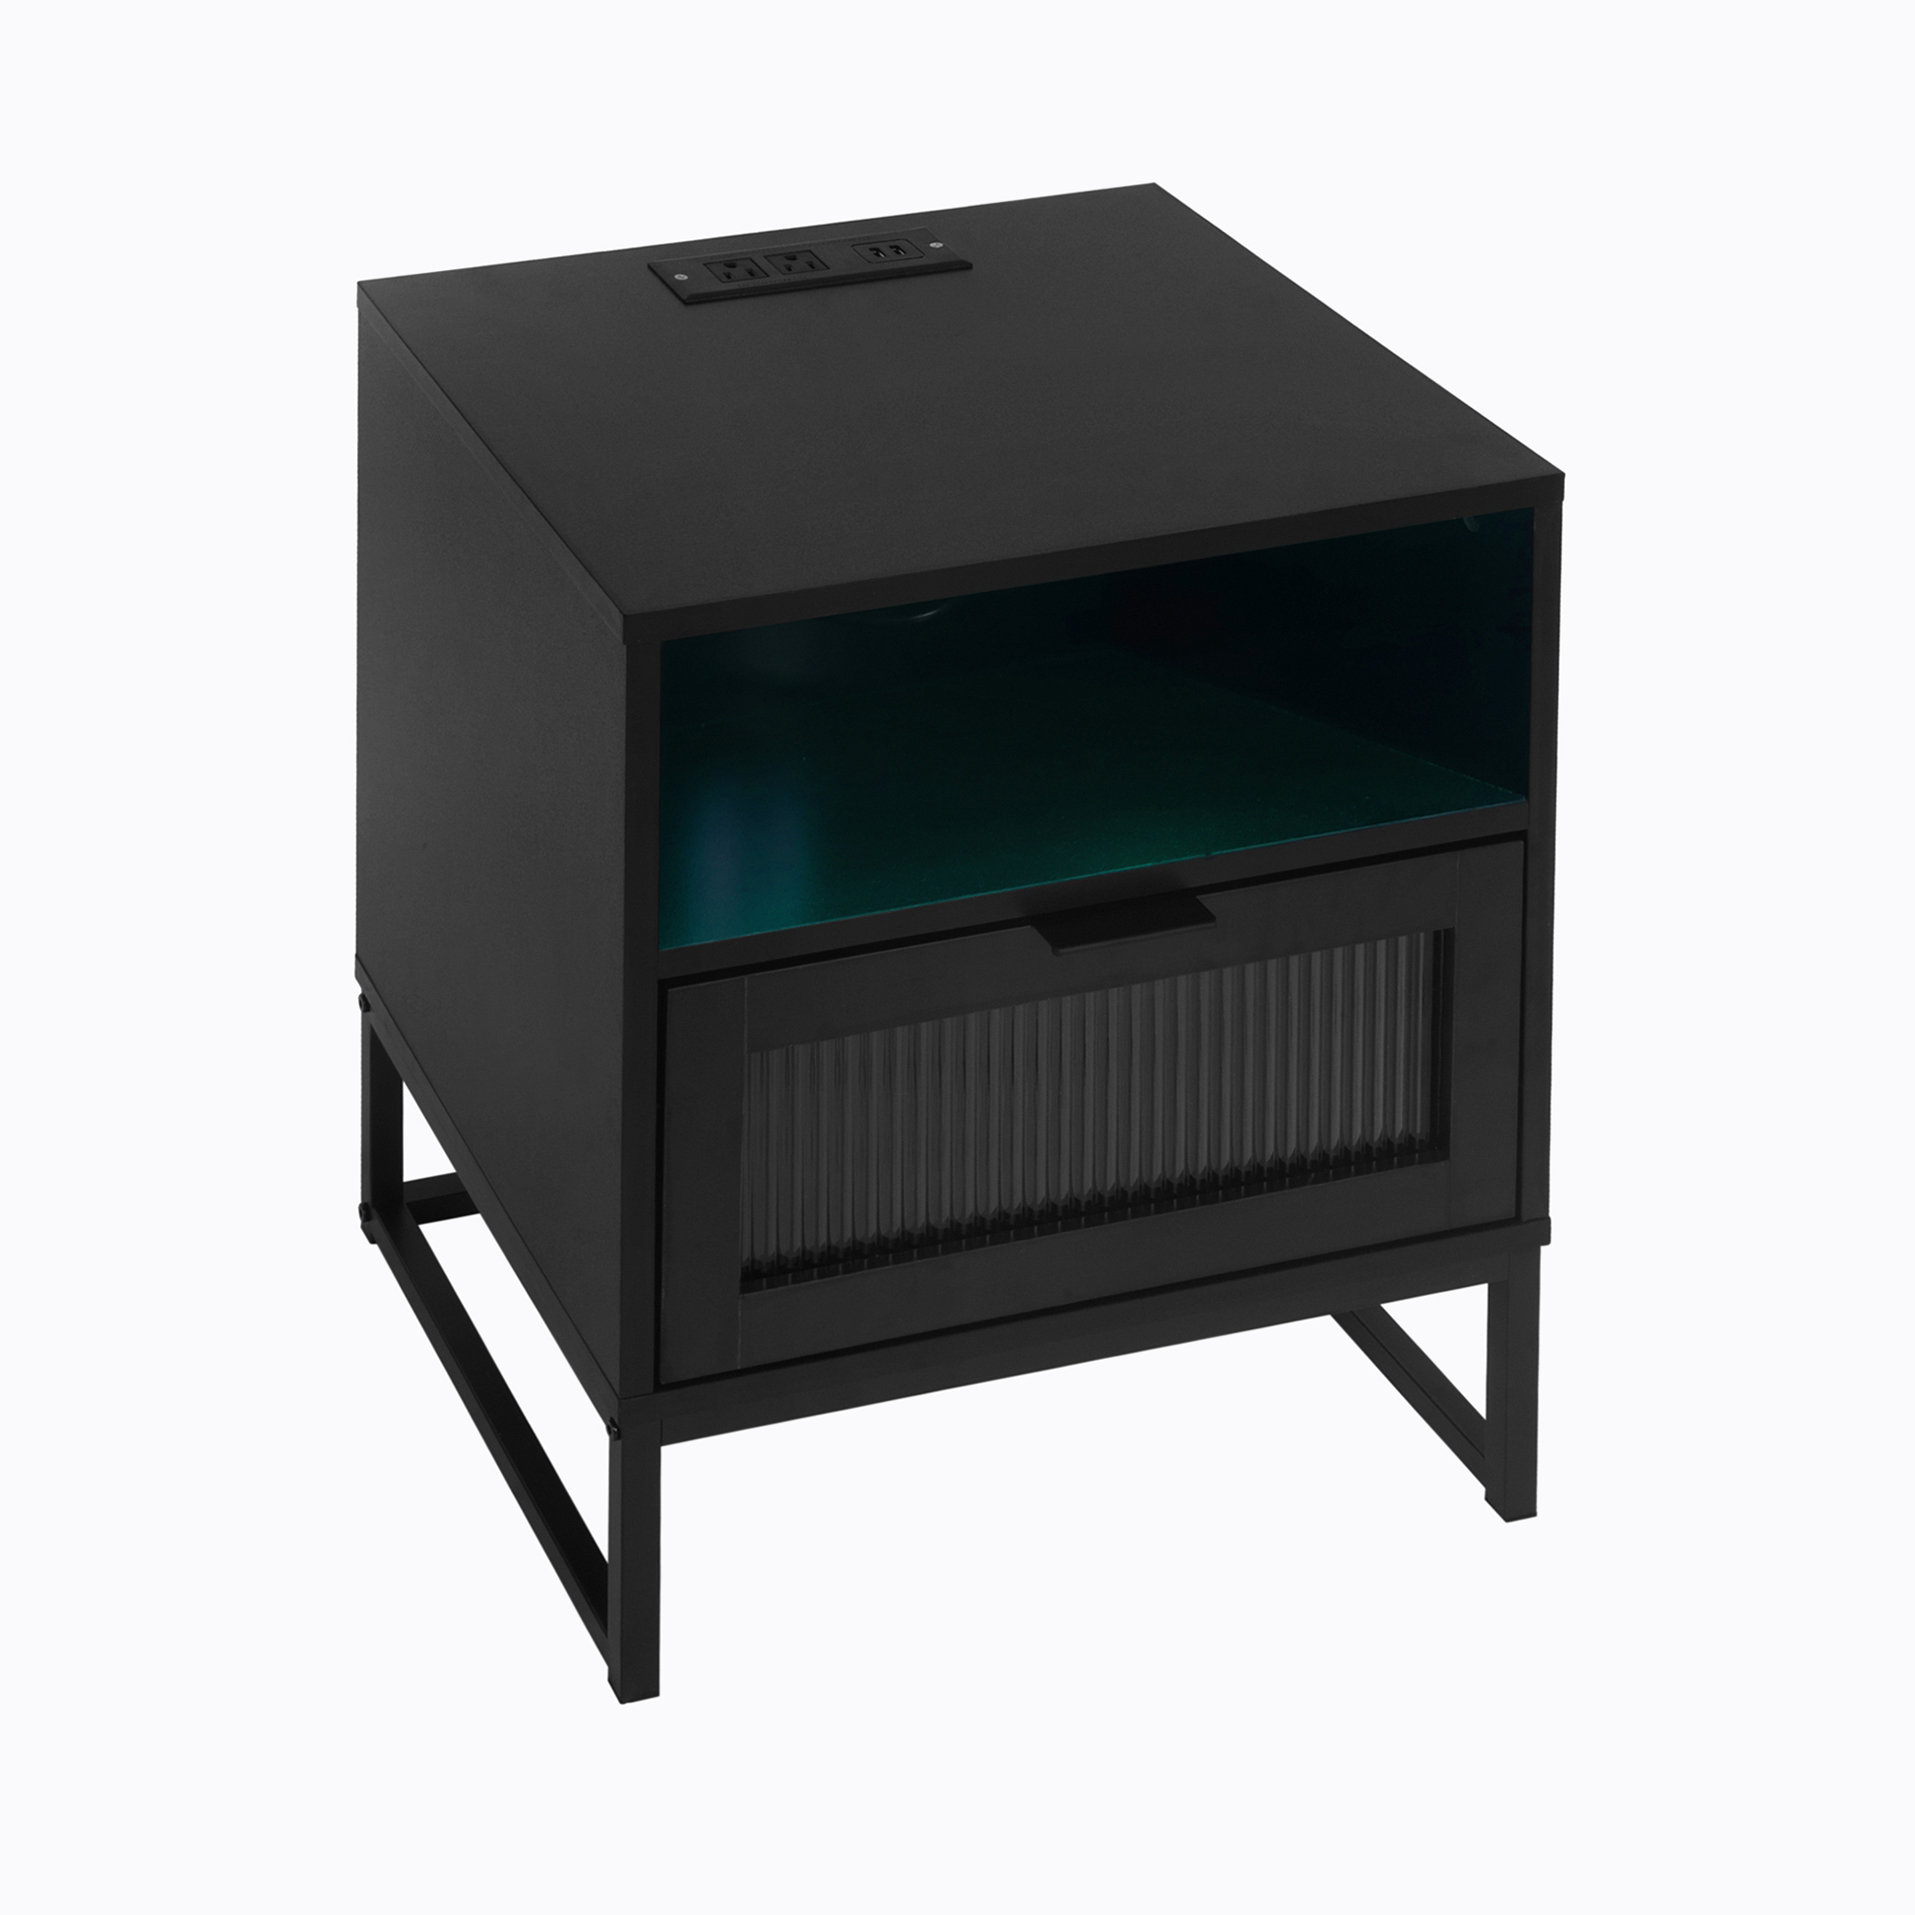 Aibne Nightstand Ebern Designs Table Top Color: Black